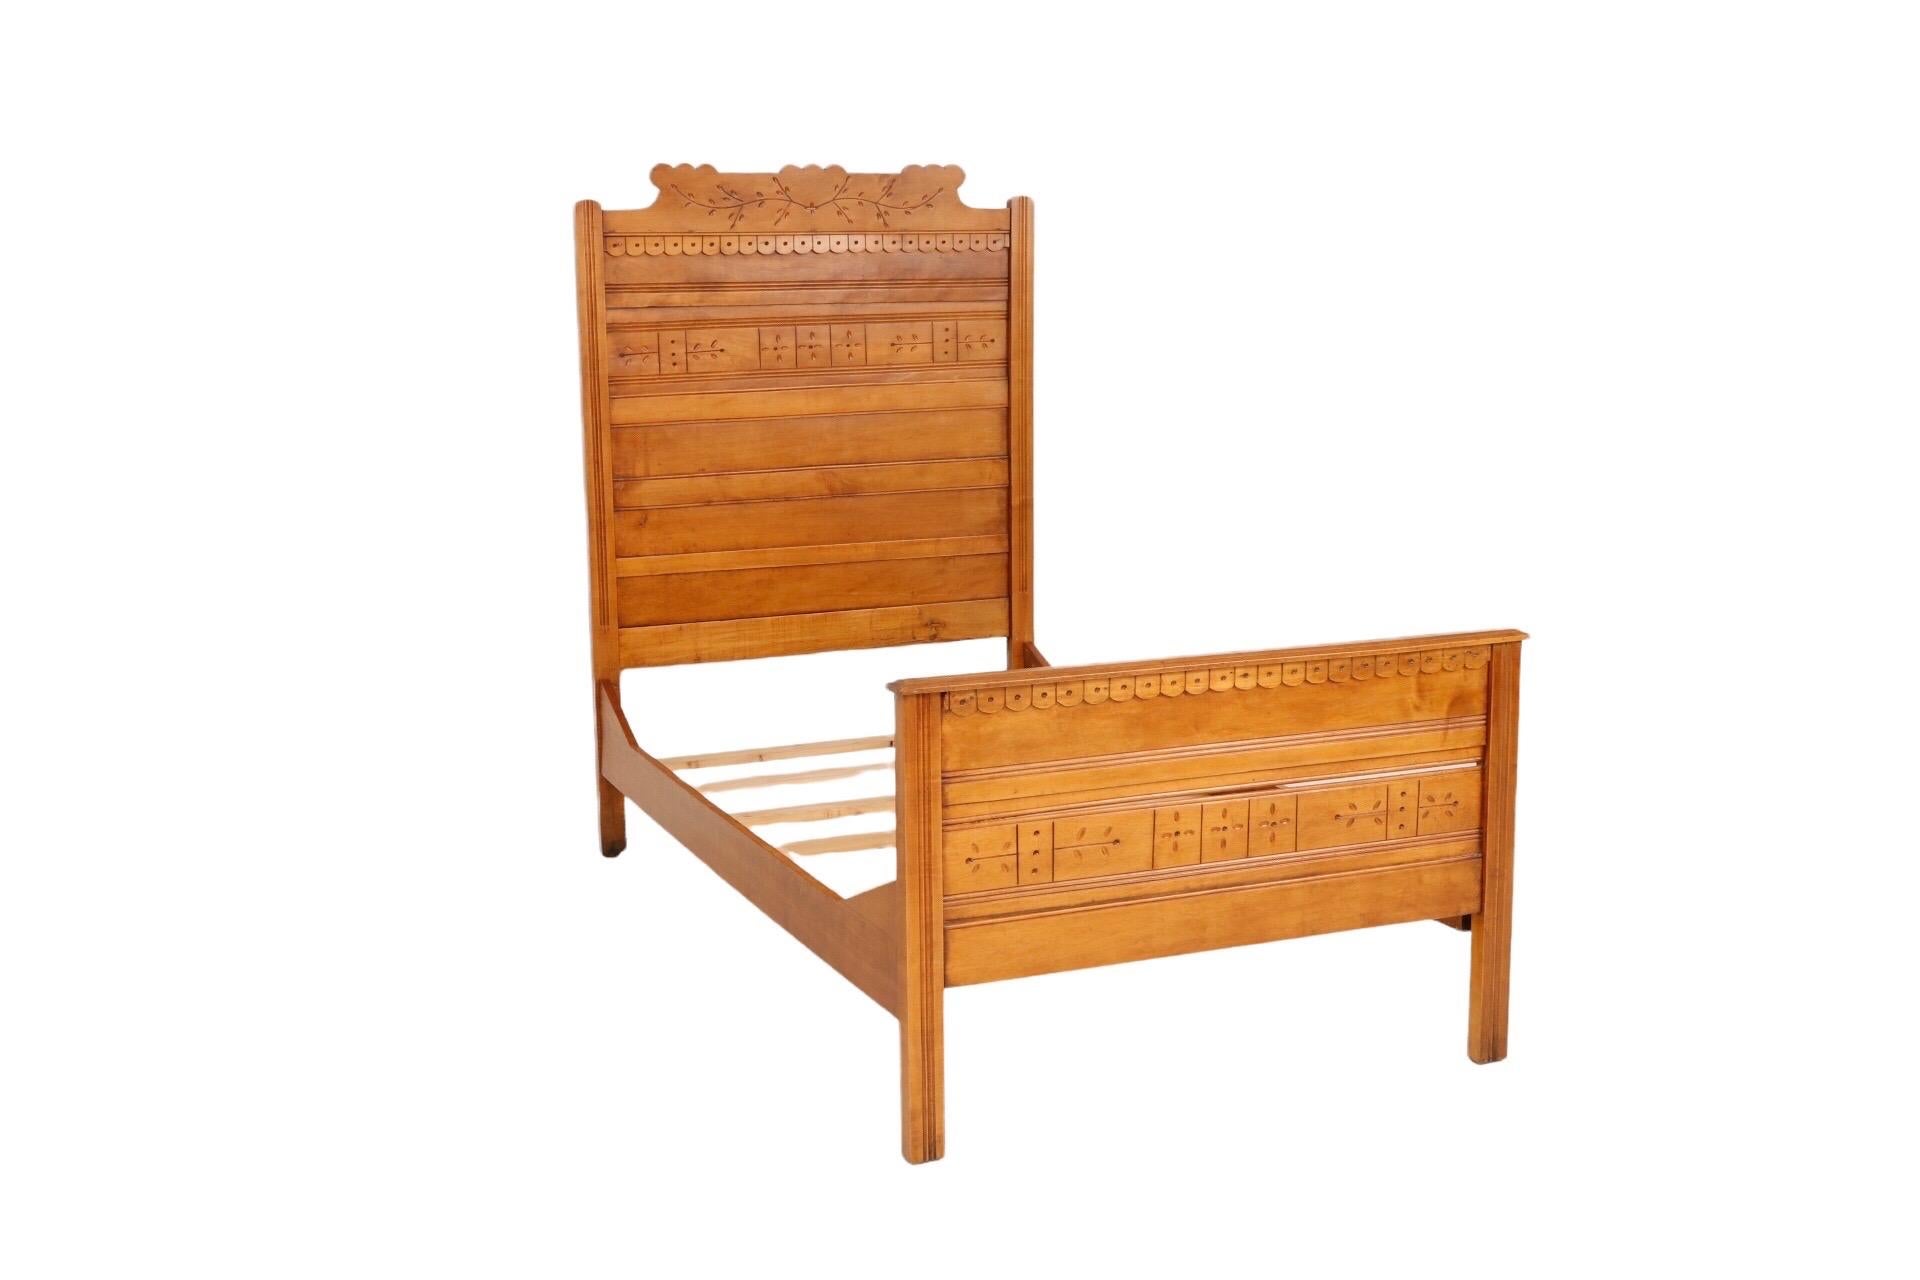 A hand carved Eastlake period twin bed made of solid walnut. The headboard pediment is decorated with elegantly carved branches and spoon shaped leaves. The headboard and footboard are trimmed with a row of applied scalloped buttons. Below, a